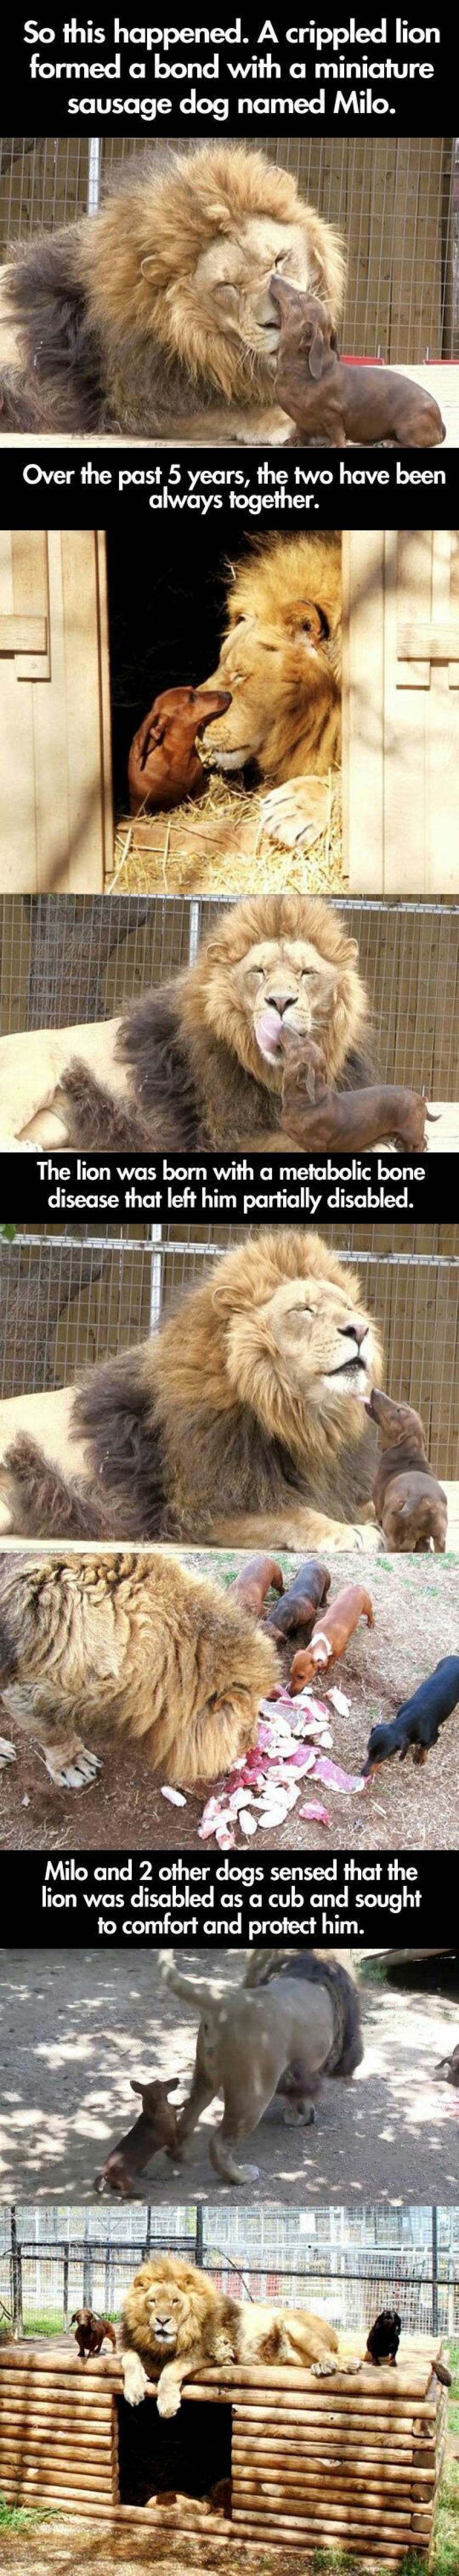 Dogs Protect Lion